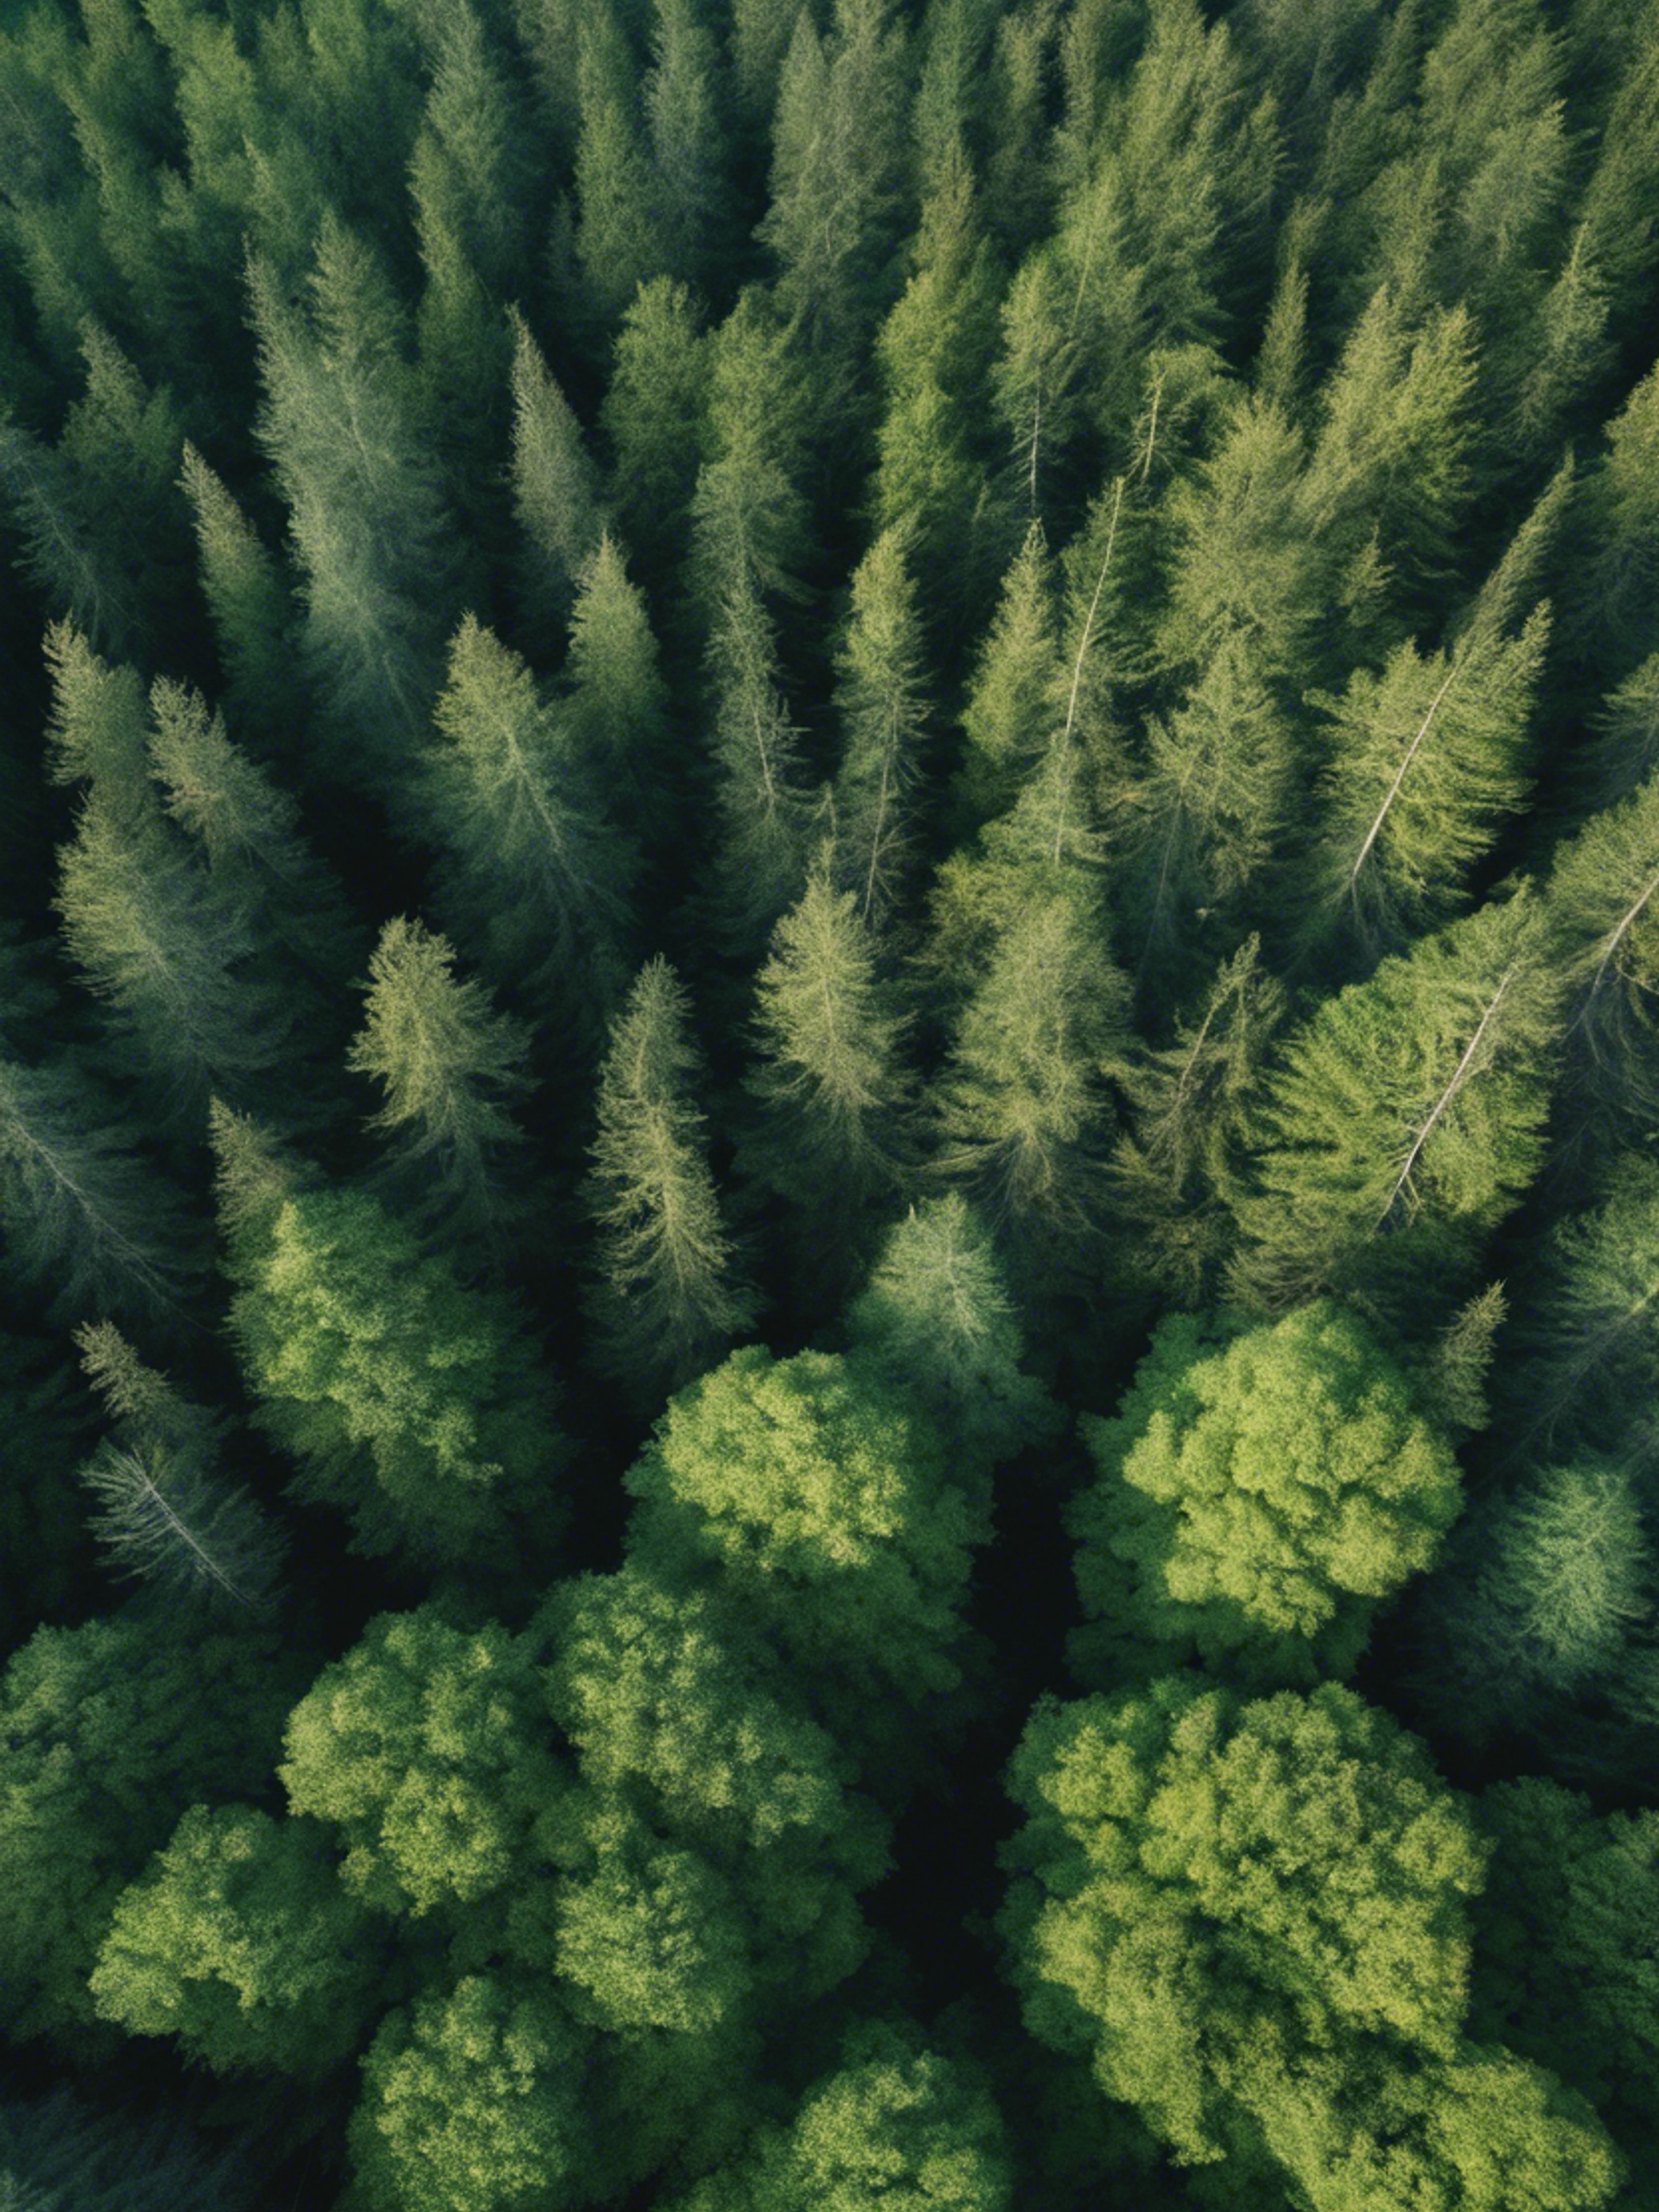 An aerial view of a summer forest, showing different shades of cool green. Tapeta[0f690078d26f4d7895b4]